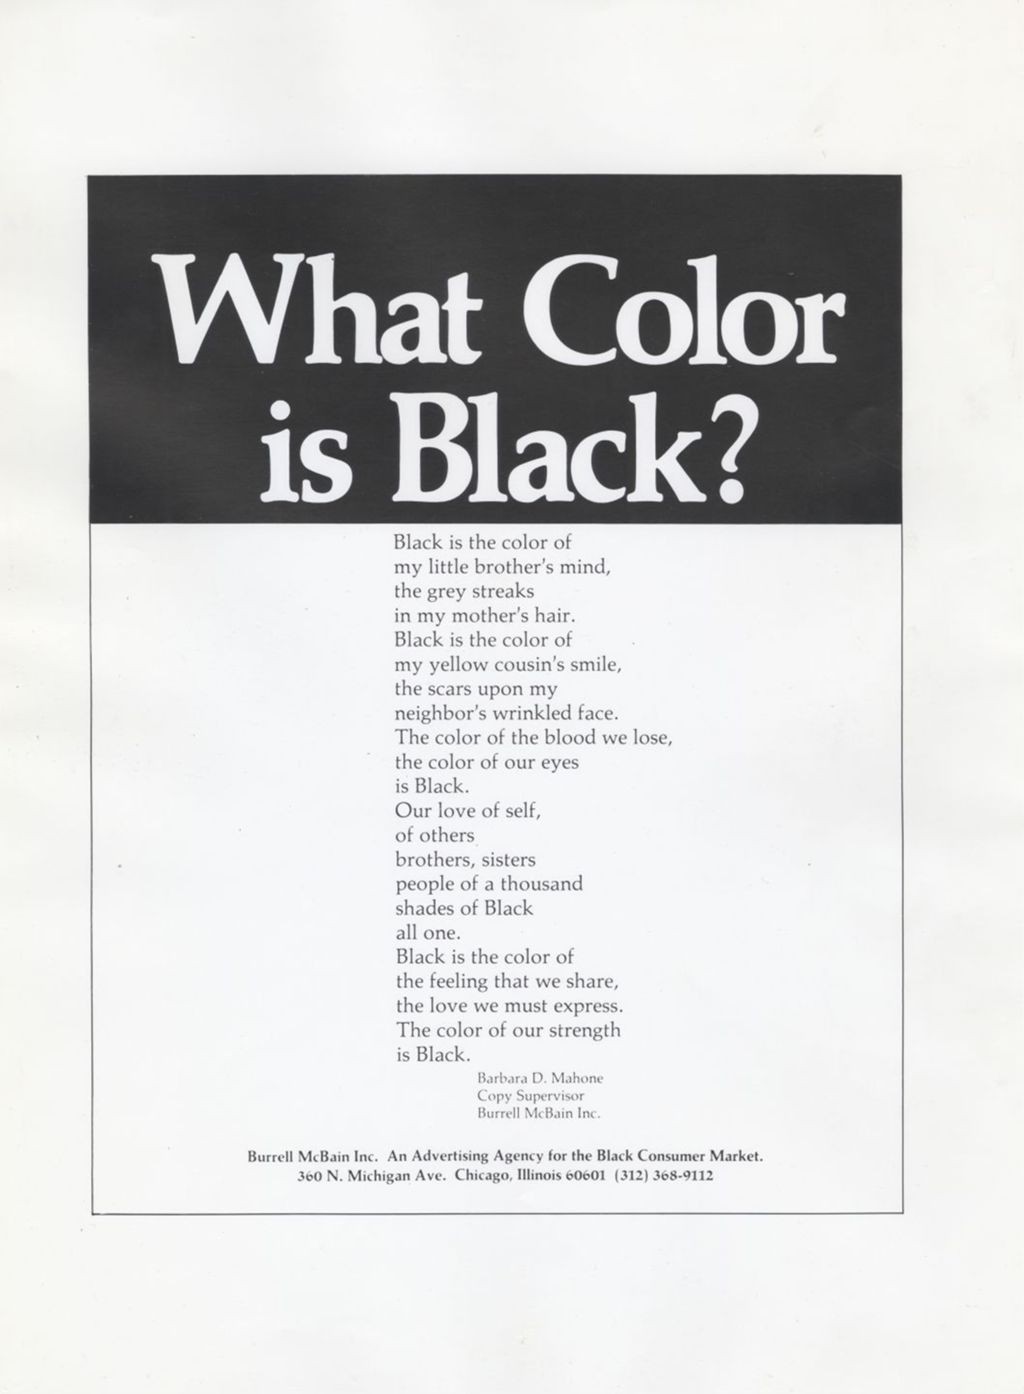 Miniature of What Color is Black? advertisement